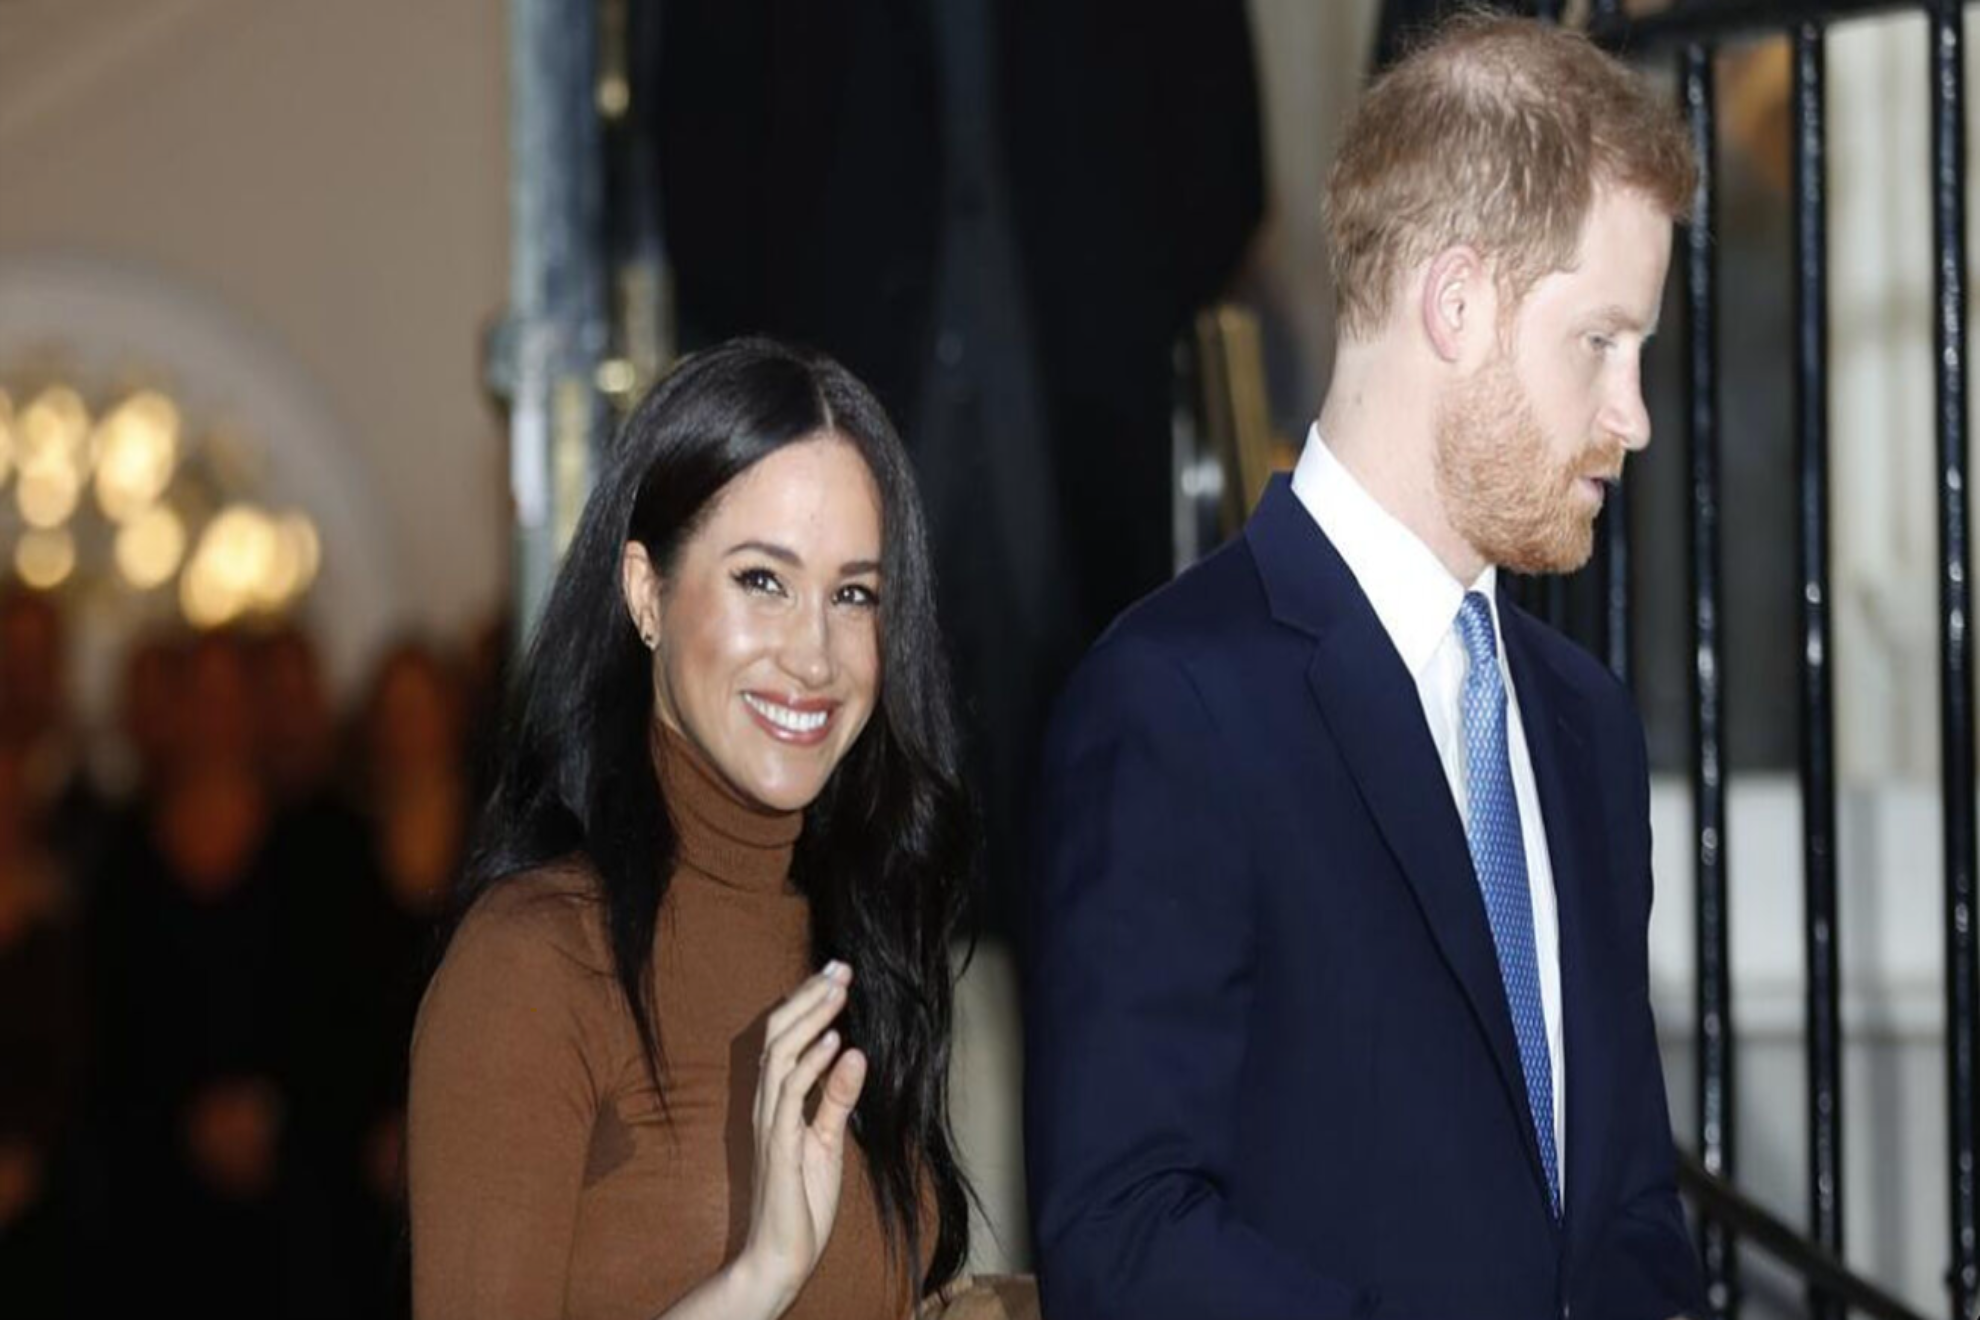 The royal website profile of Harry and Meghan's son Archie reappears with a major error